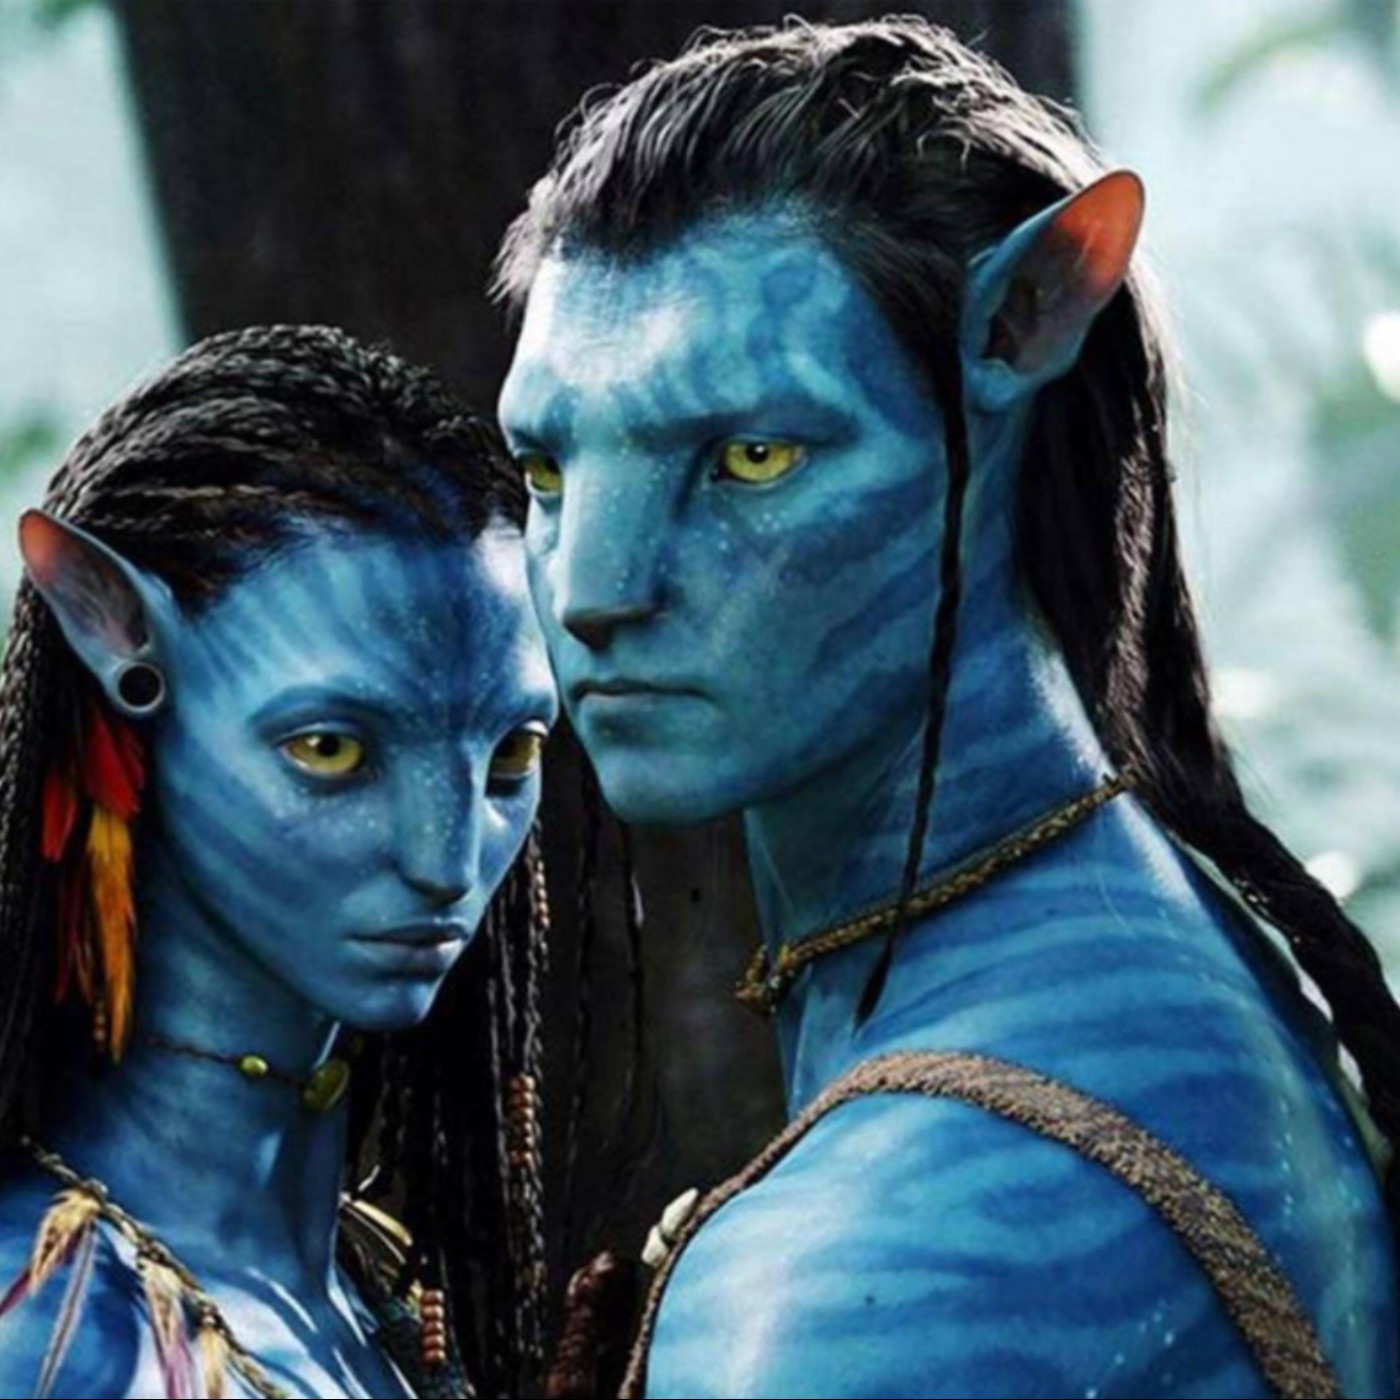 Avatar 2 Movie Download The Way Of Water HD 4K 1080p 480p 720p Review